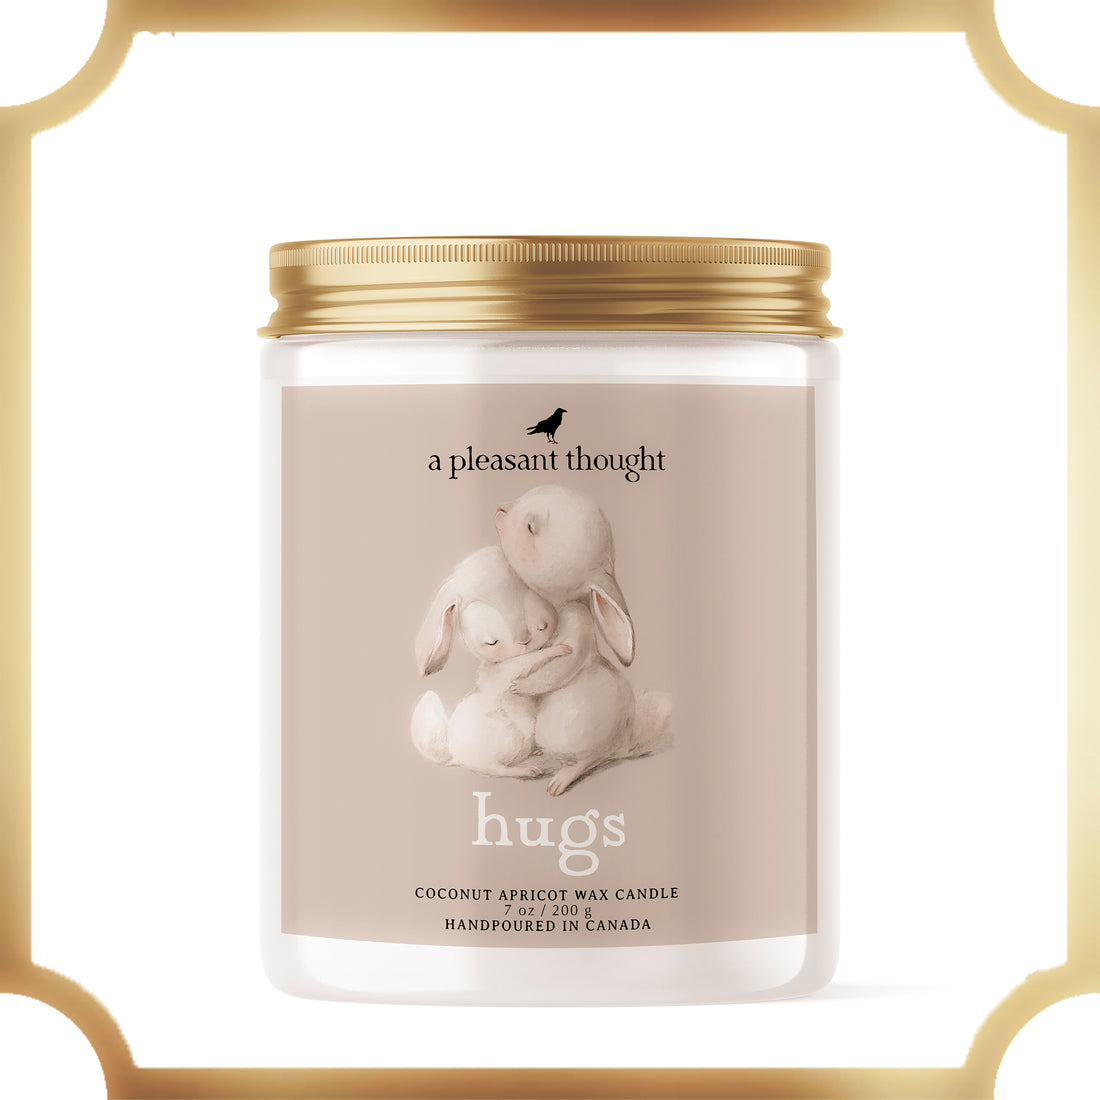  Storybook | Classic Sentiment Candles